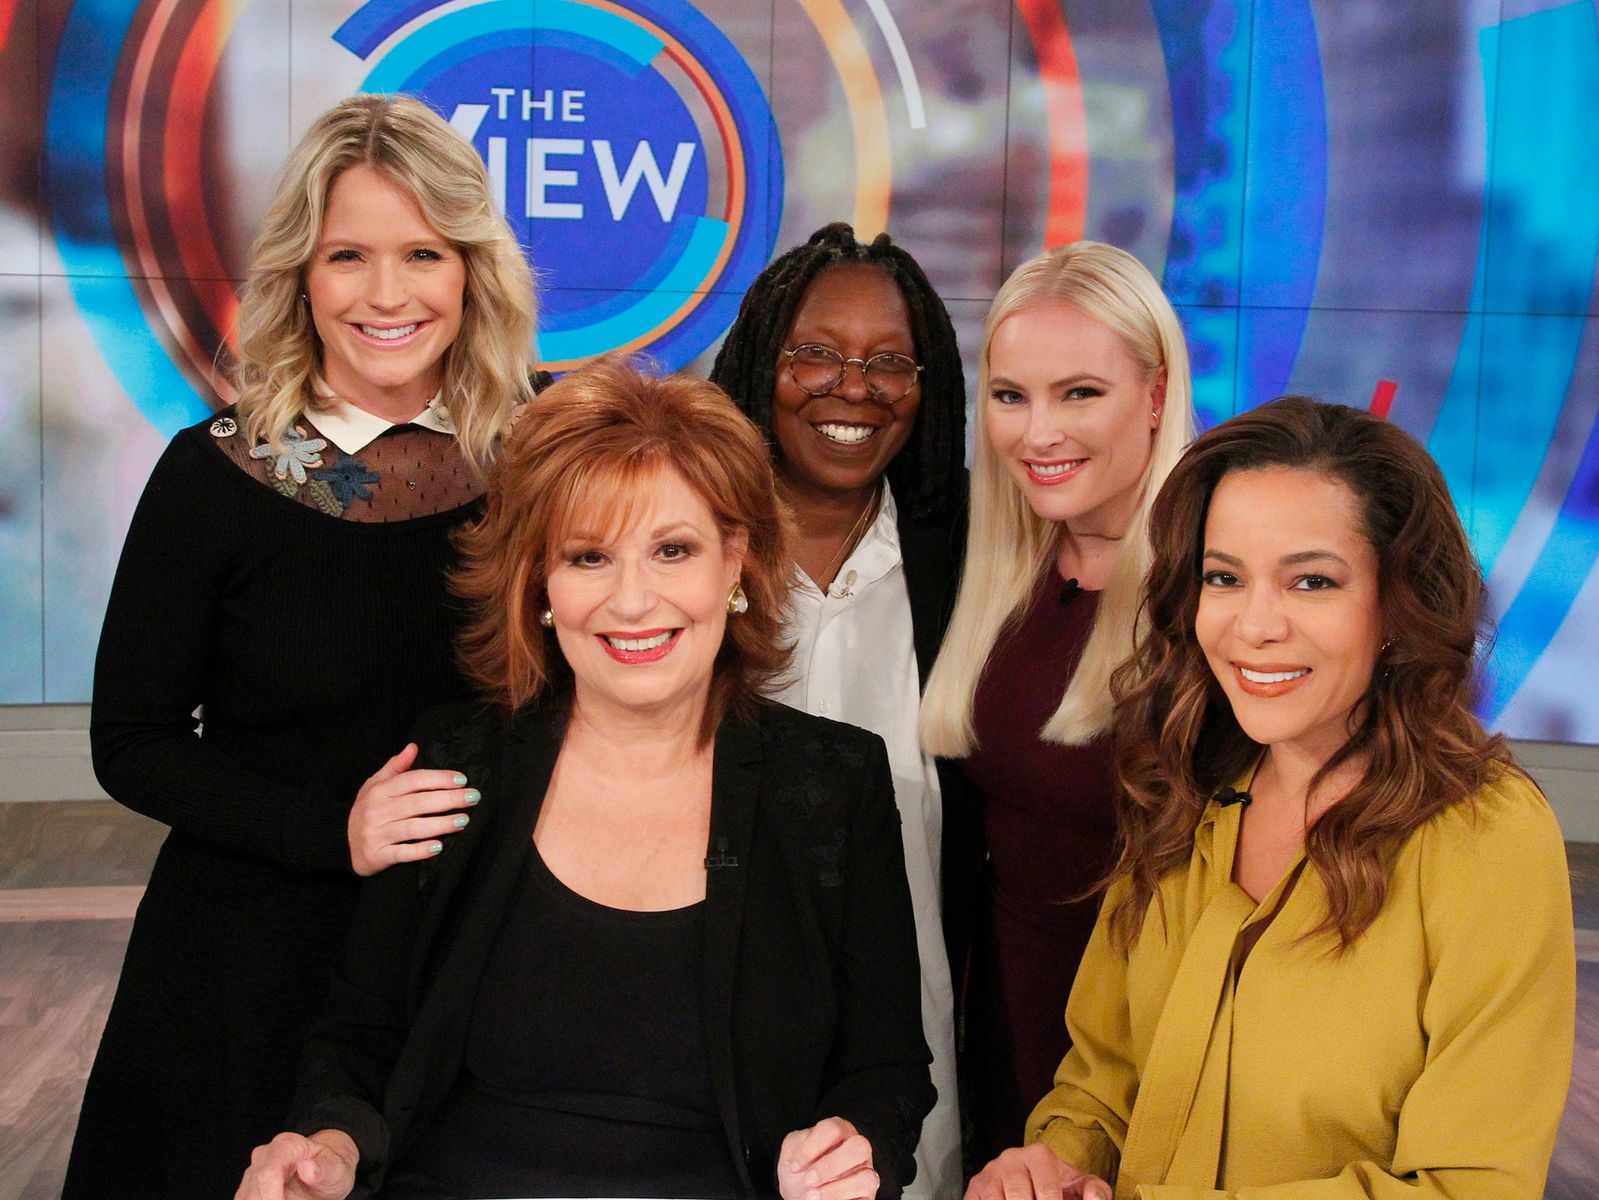 "The View" welcomes Meghan McCain as the newest co-host on October 09, 2017, alongside Sara Haines, Joy Behar, Whoopi Goldberg, and Sunny Hostin | Photo: Lou Rocco/ABC/Getty Images